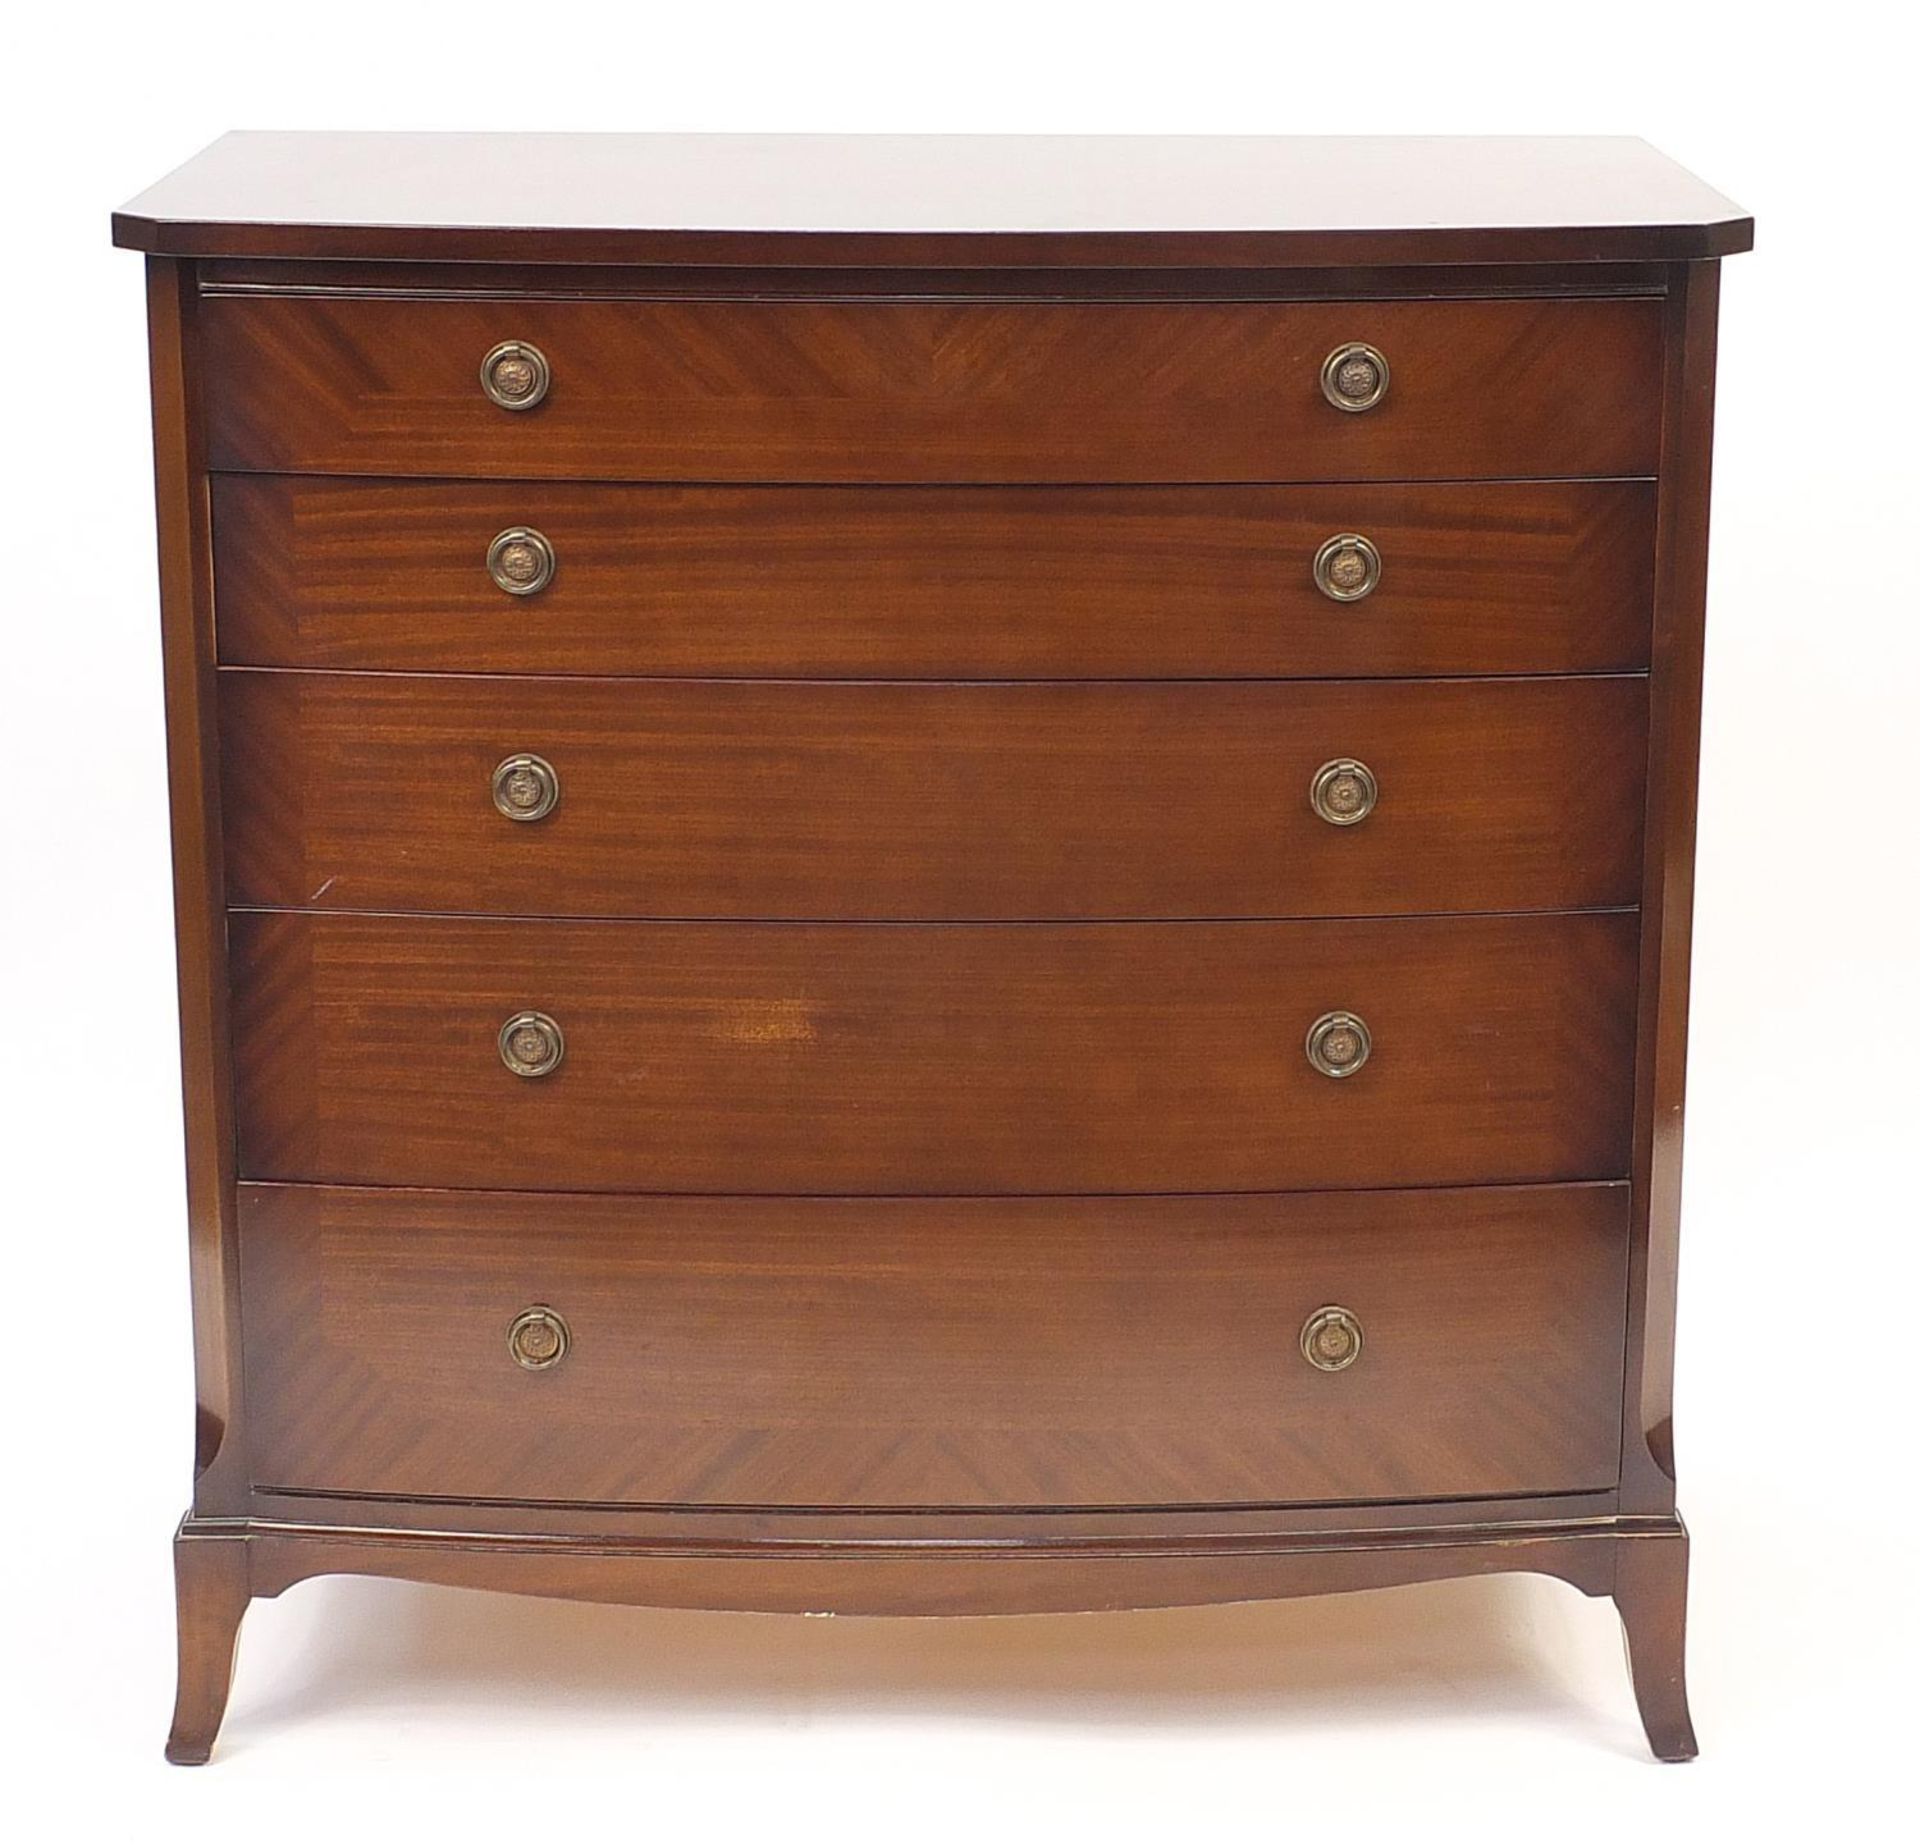 Strongbow mahogany bow fronted chest of drawers with ring handles, 93cm H x 91cm W x 48cm D - Image 2 of 4